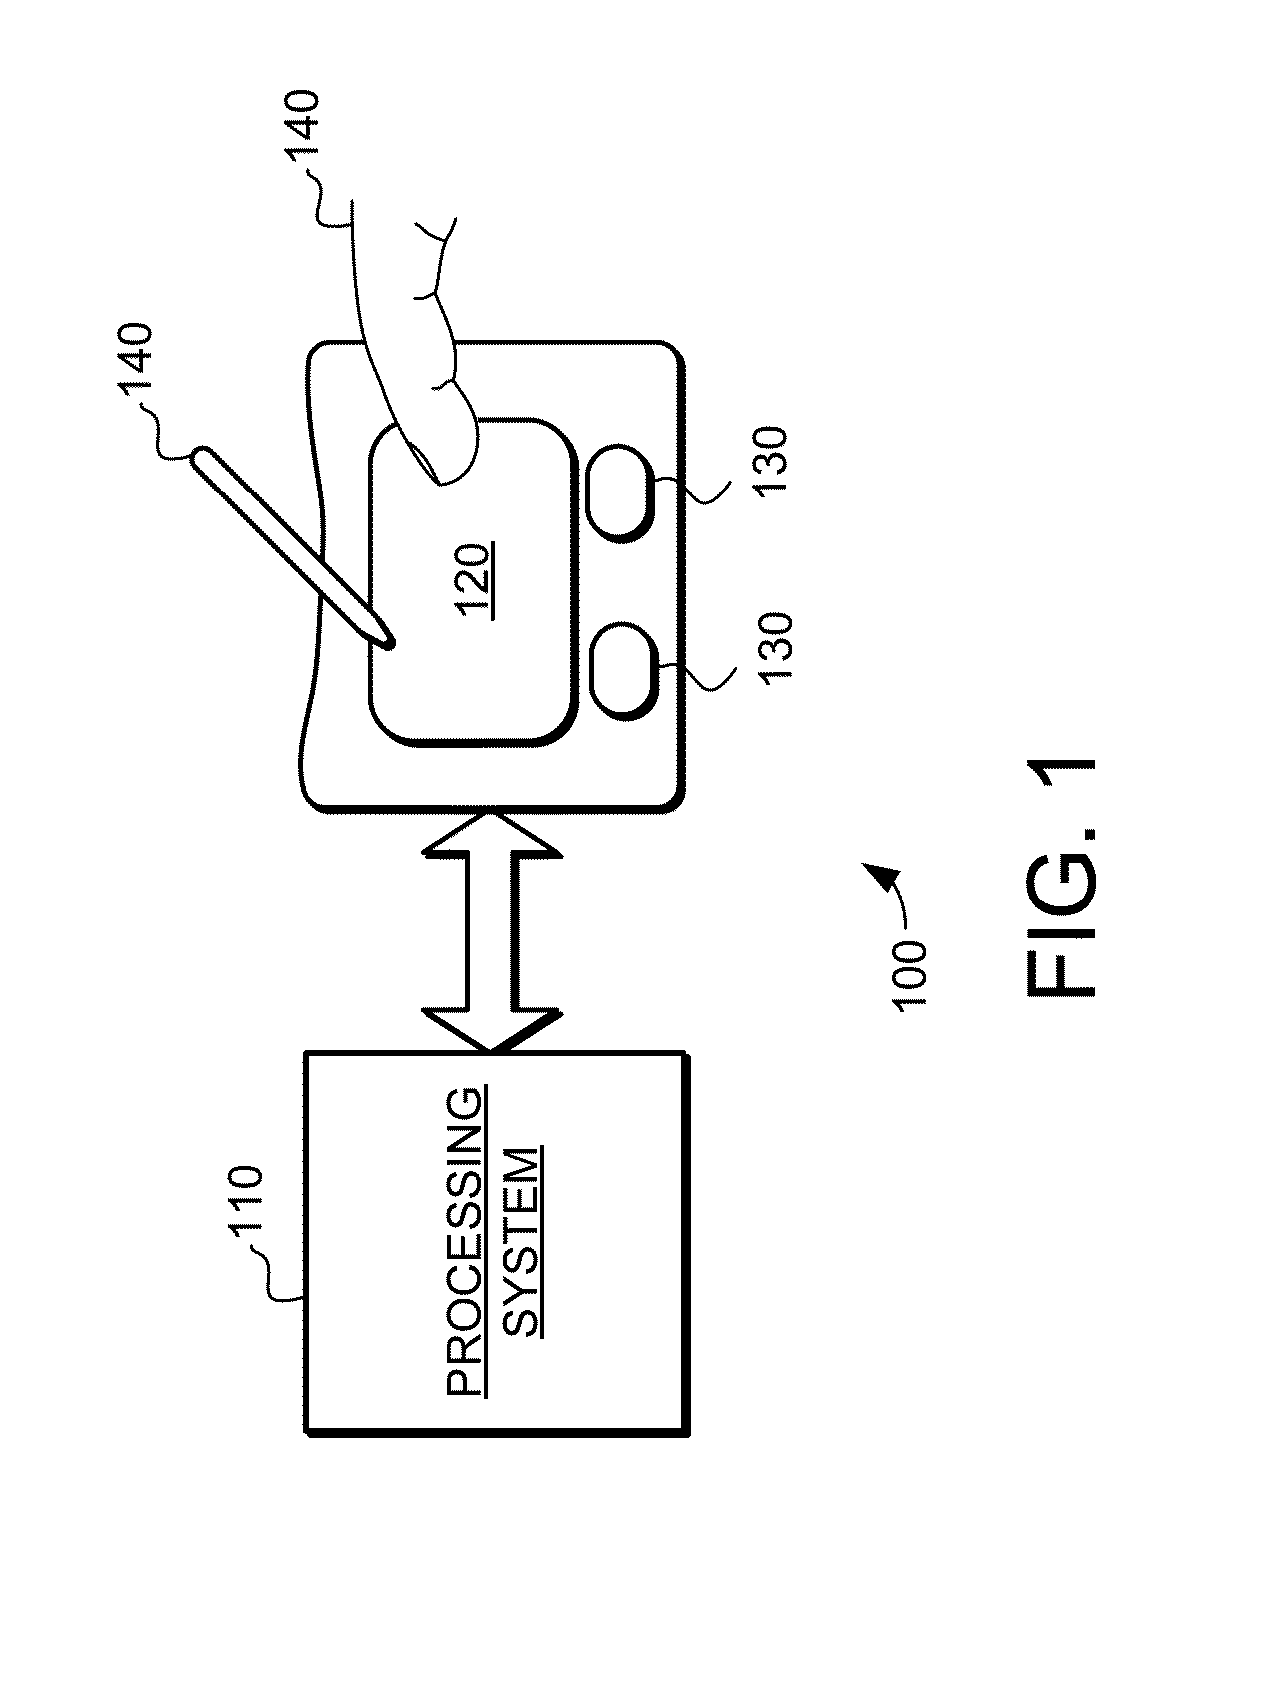 Systems and methods for decoupling image generation rate from reporting rate in capacitive sensing